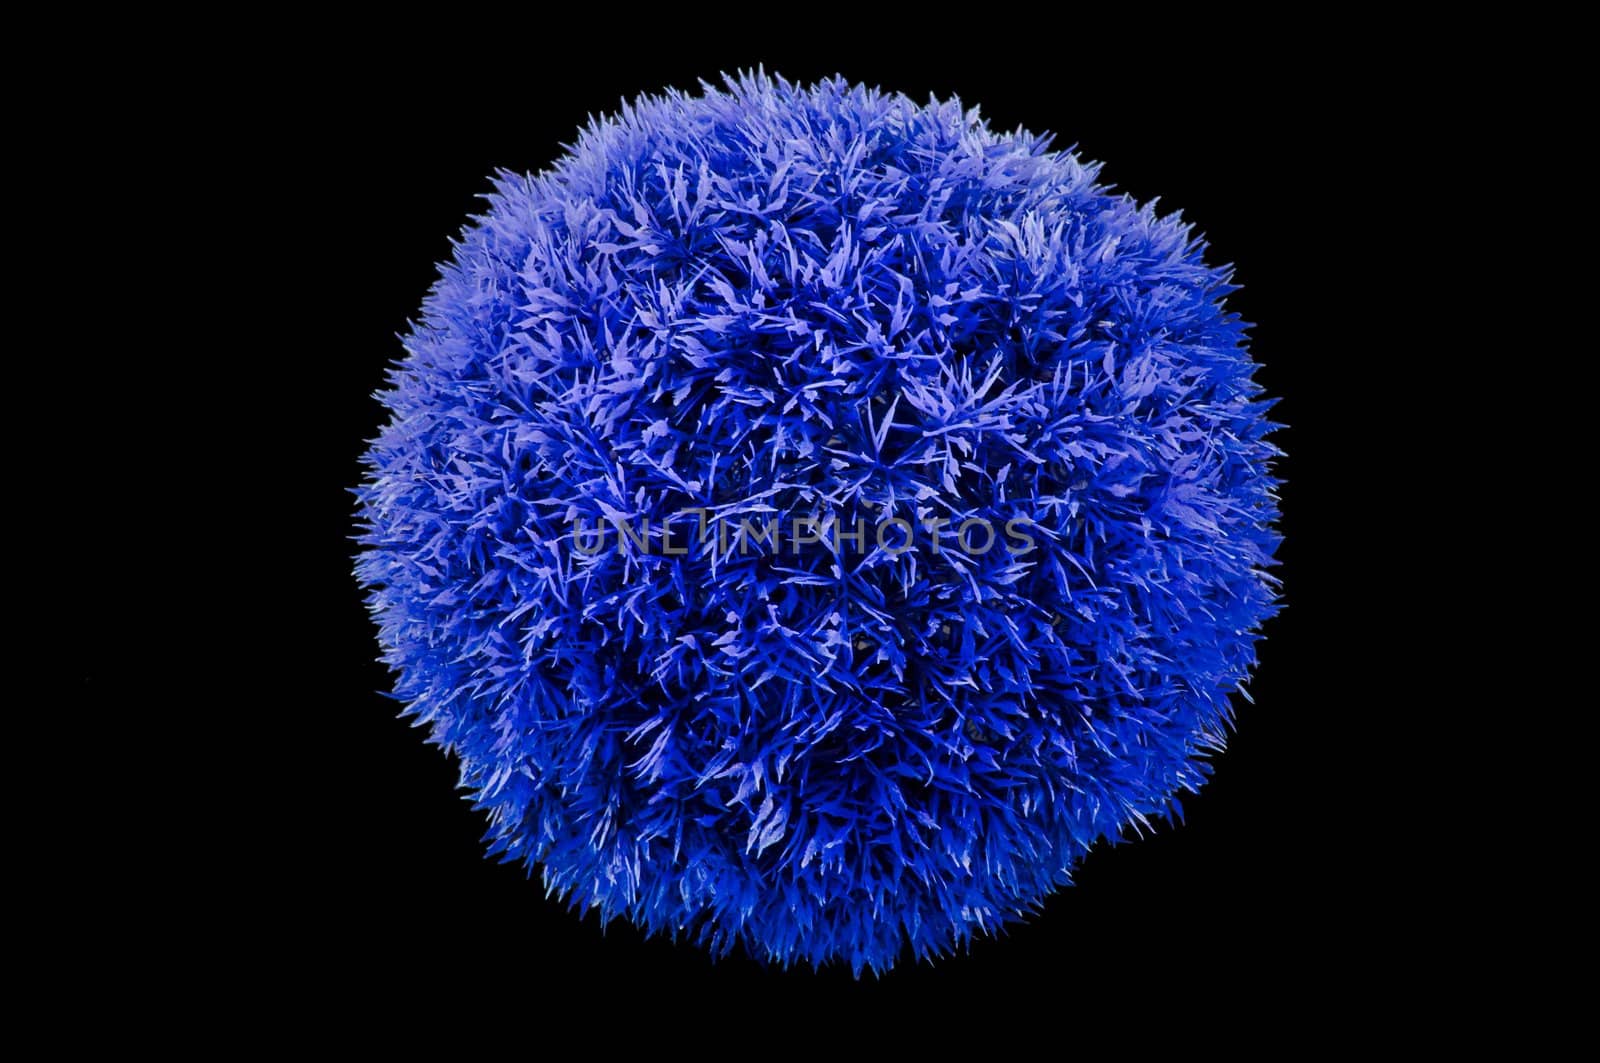 Big blue grass ball isolated on black